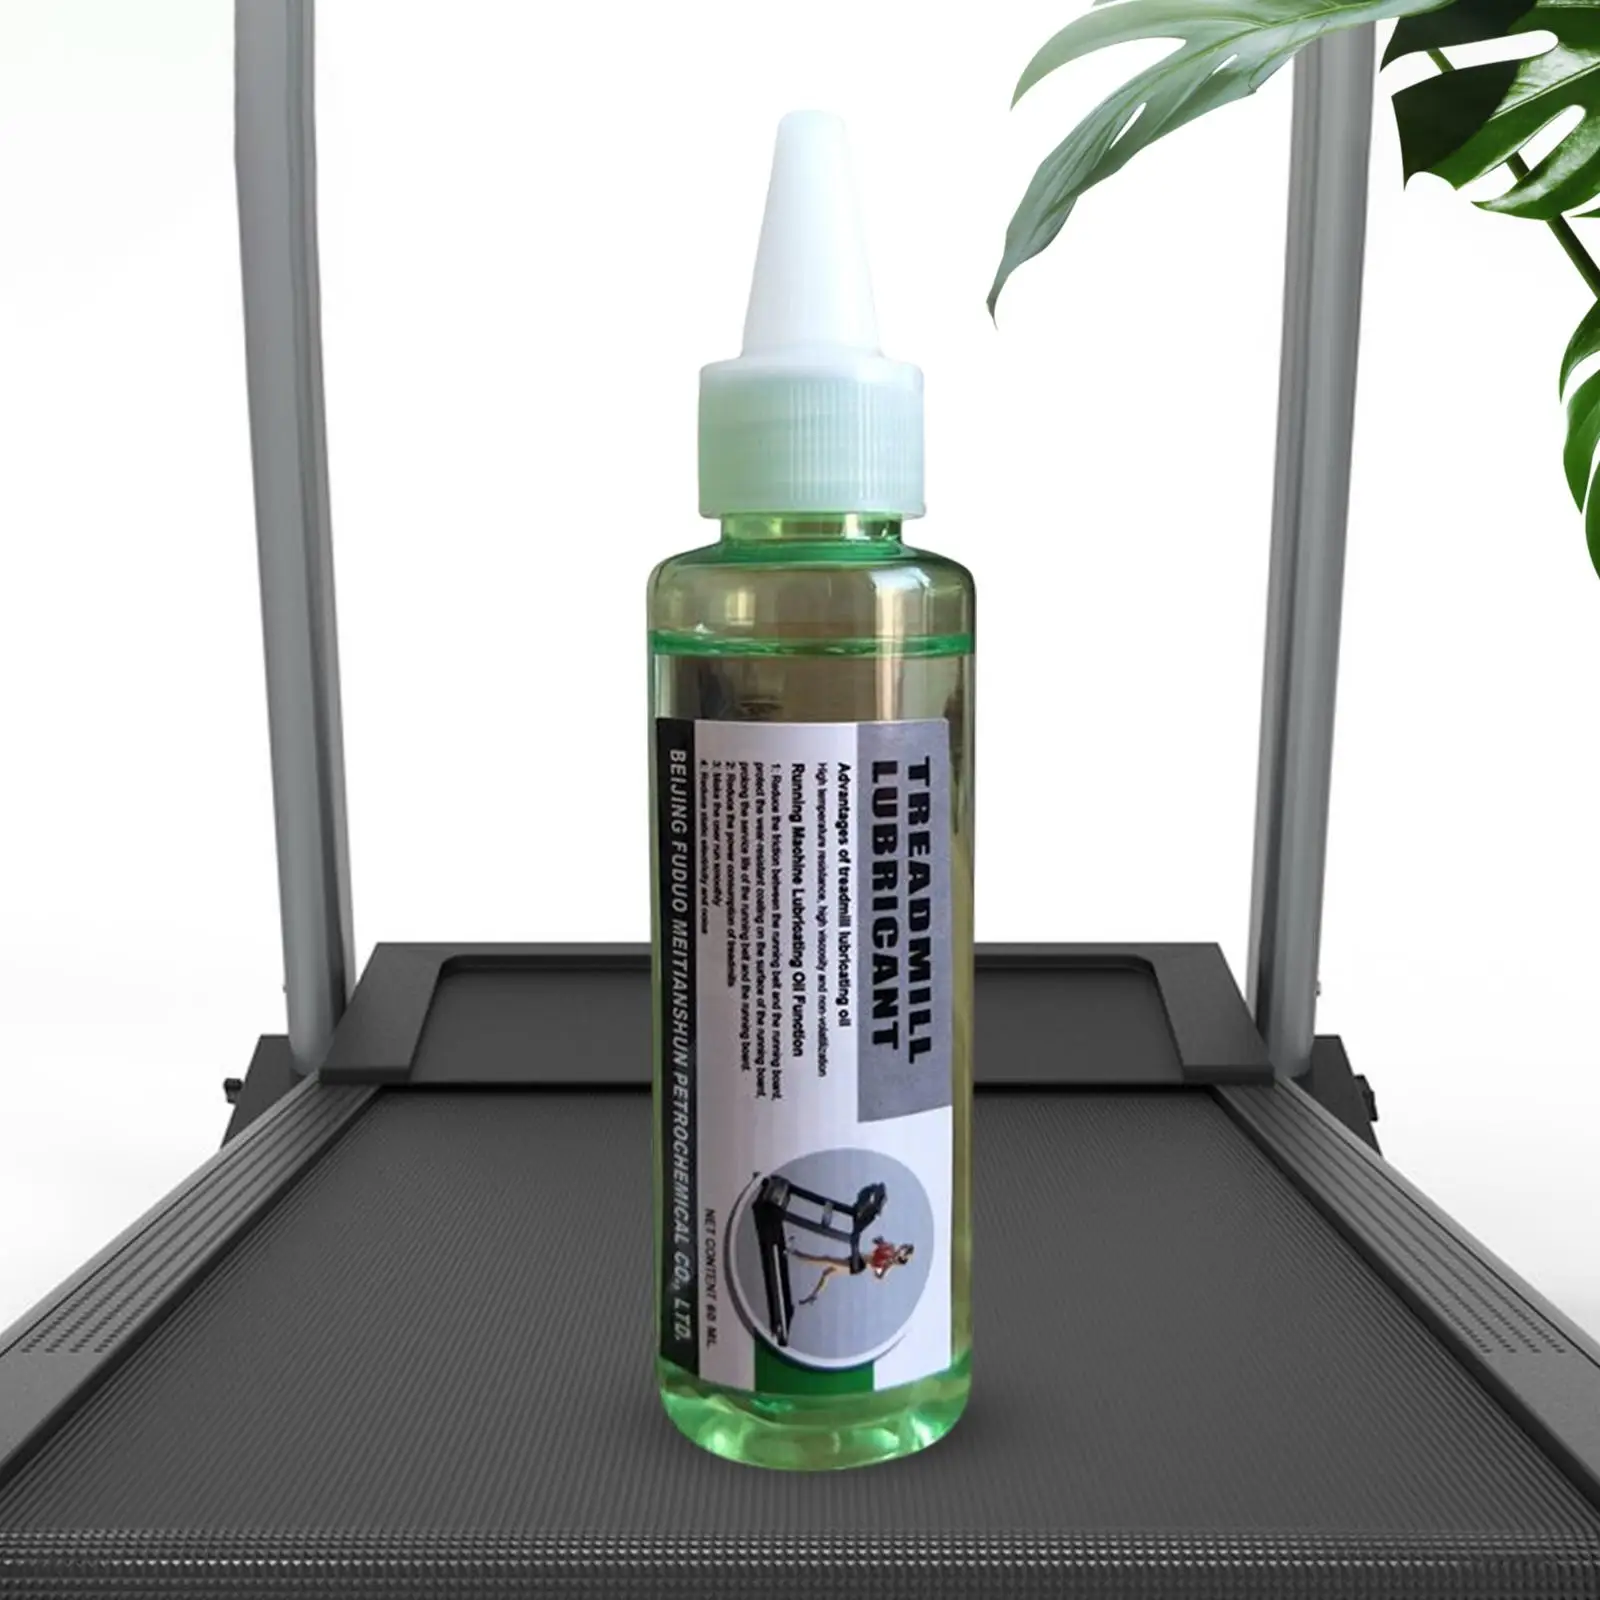 Treadmill Lubricating Silicone Oil Lubricating Oil Universal for Home Gym